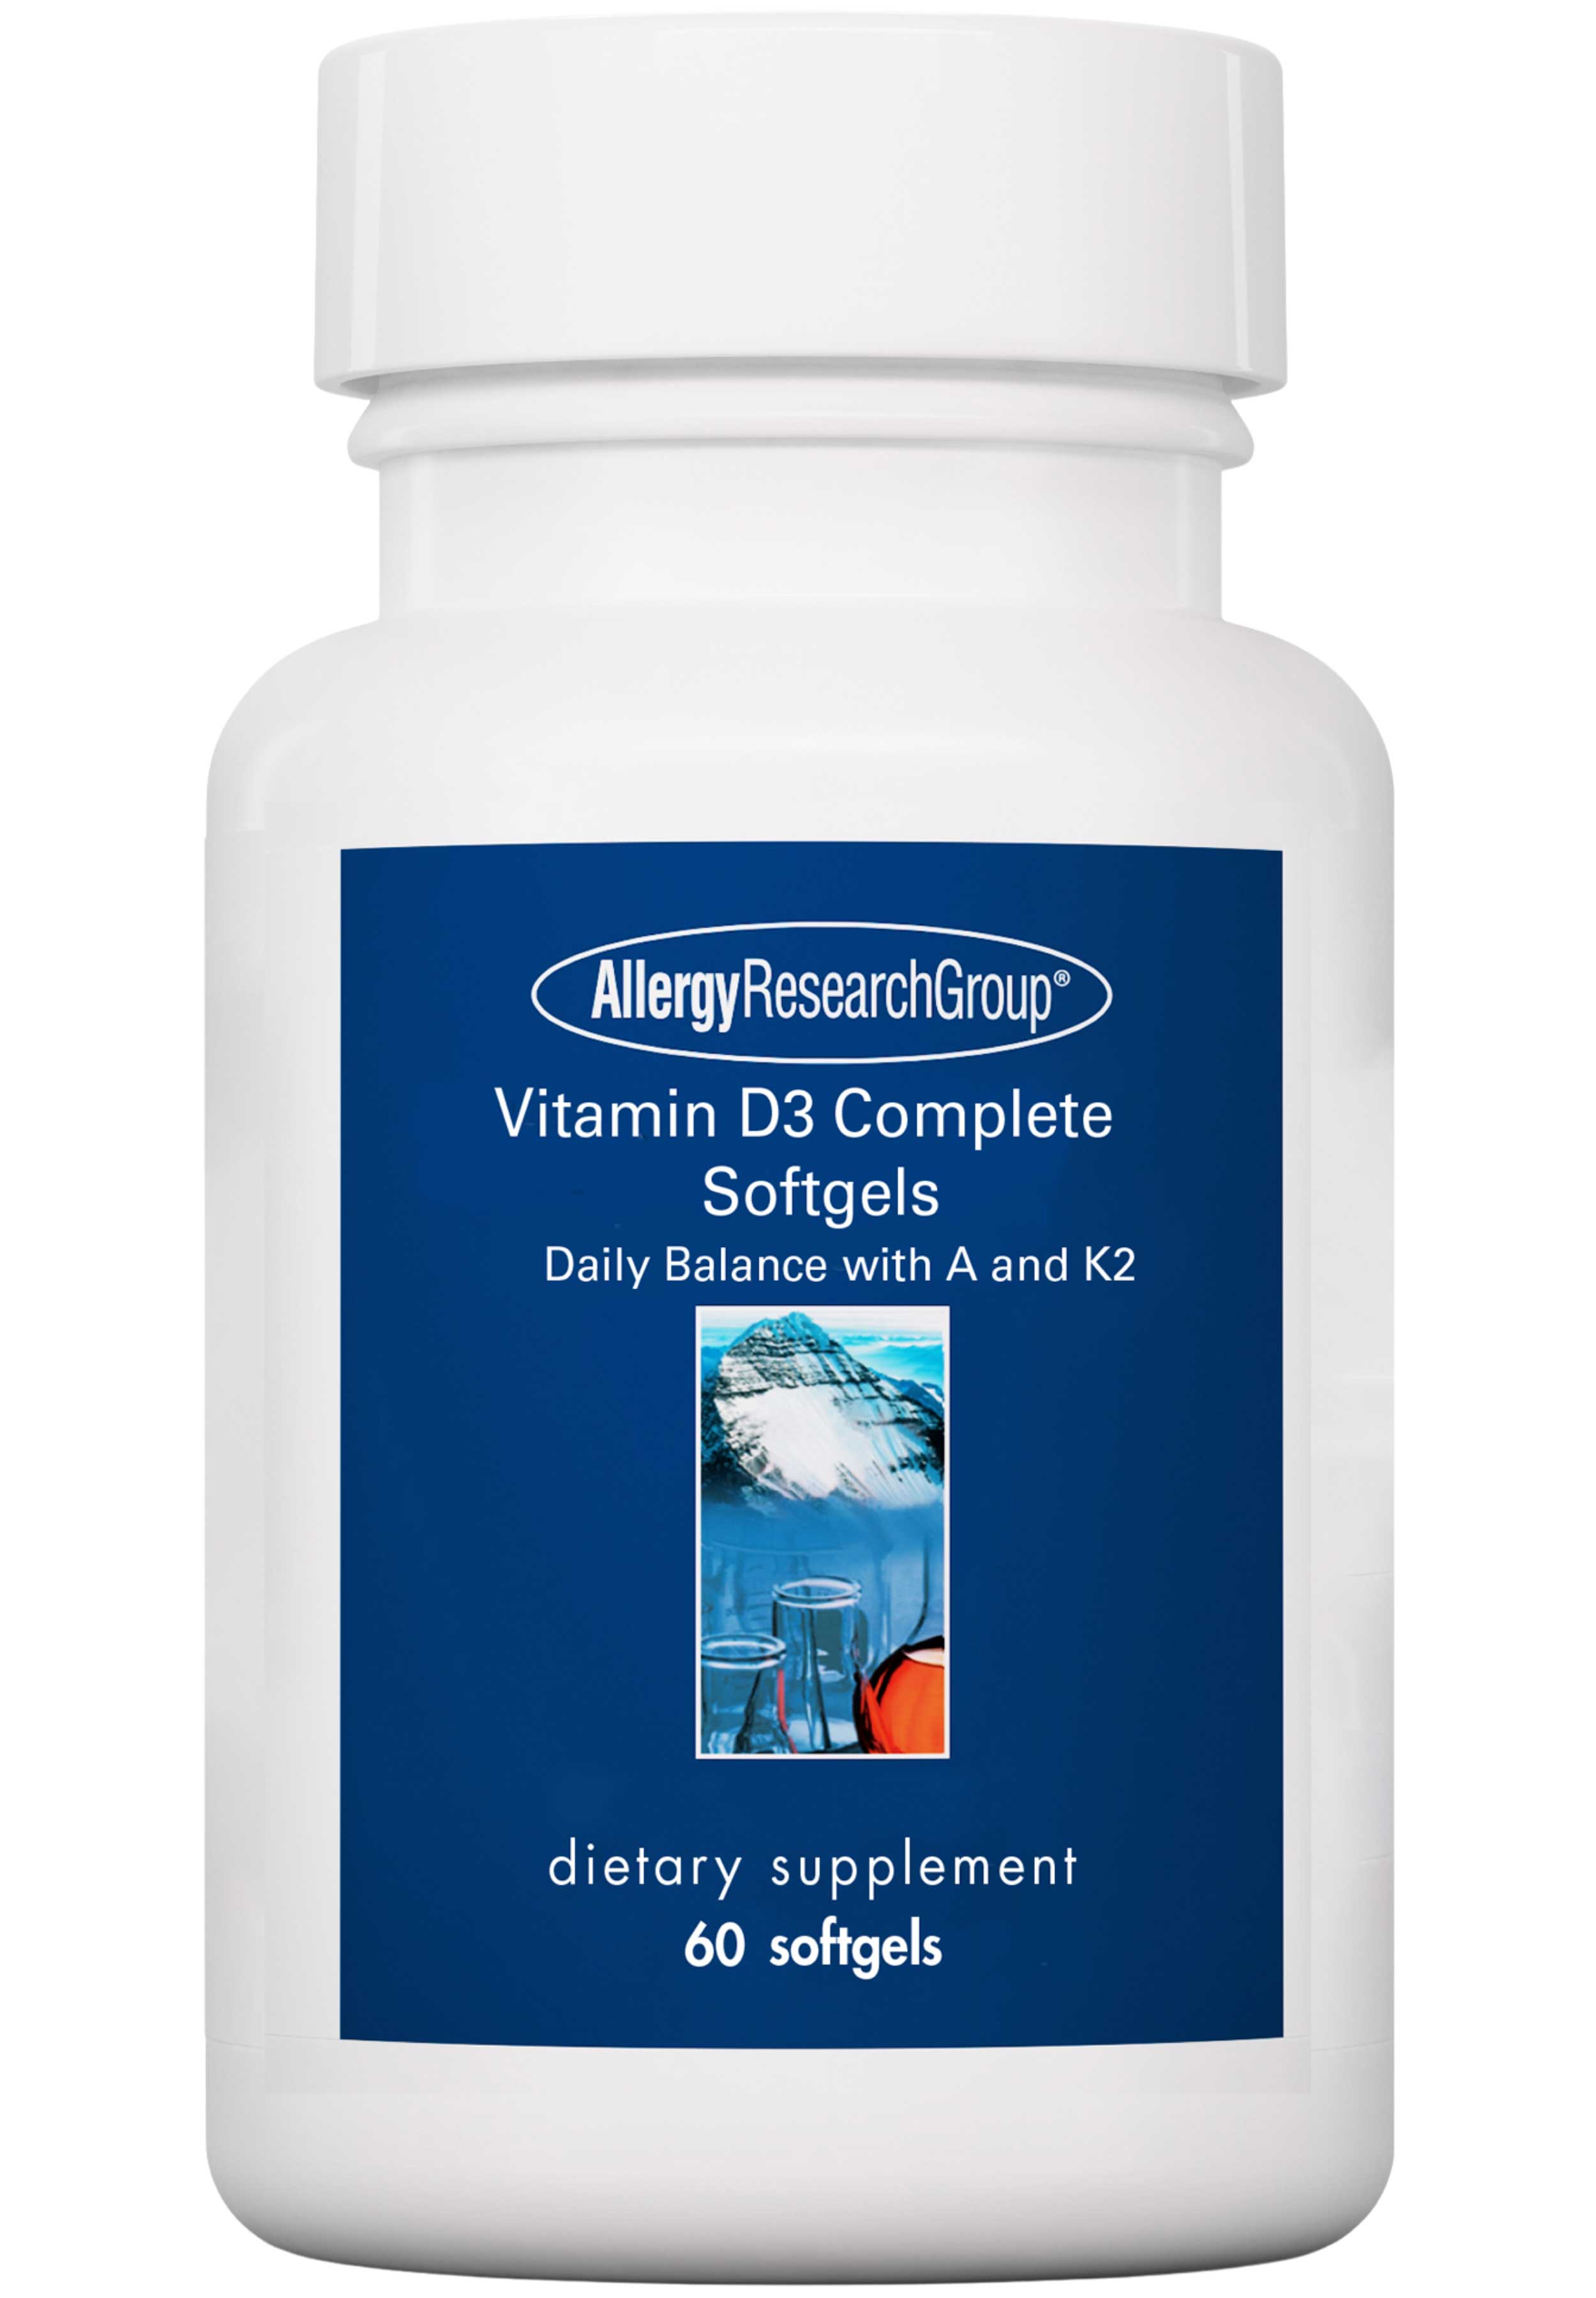 Allergy Research Group Vitamin D3 Complete Softgels